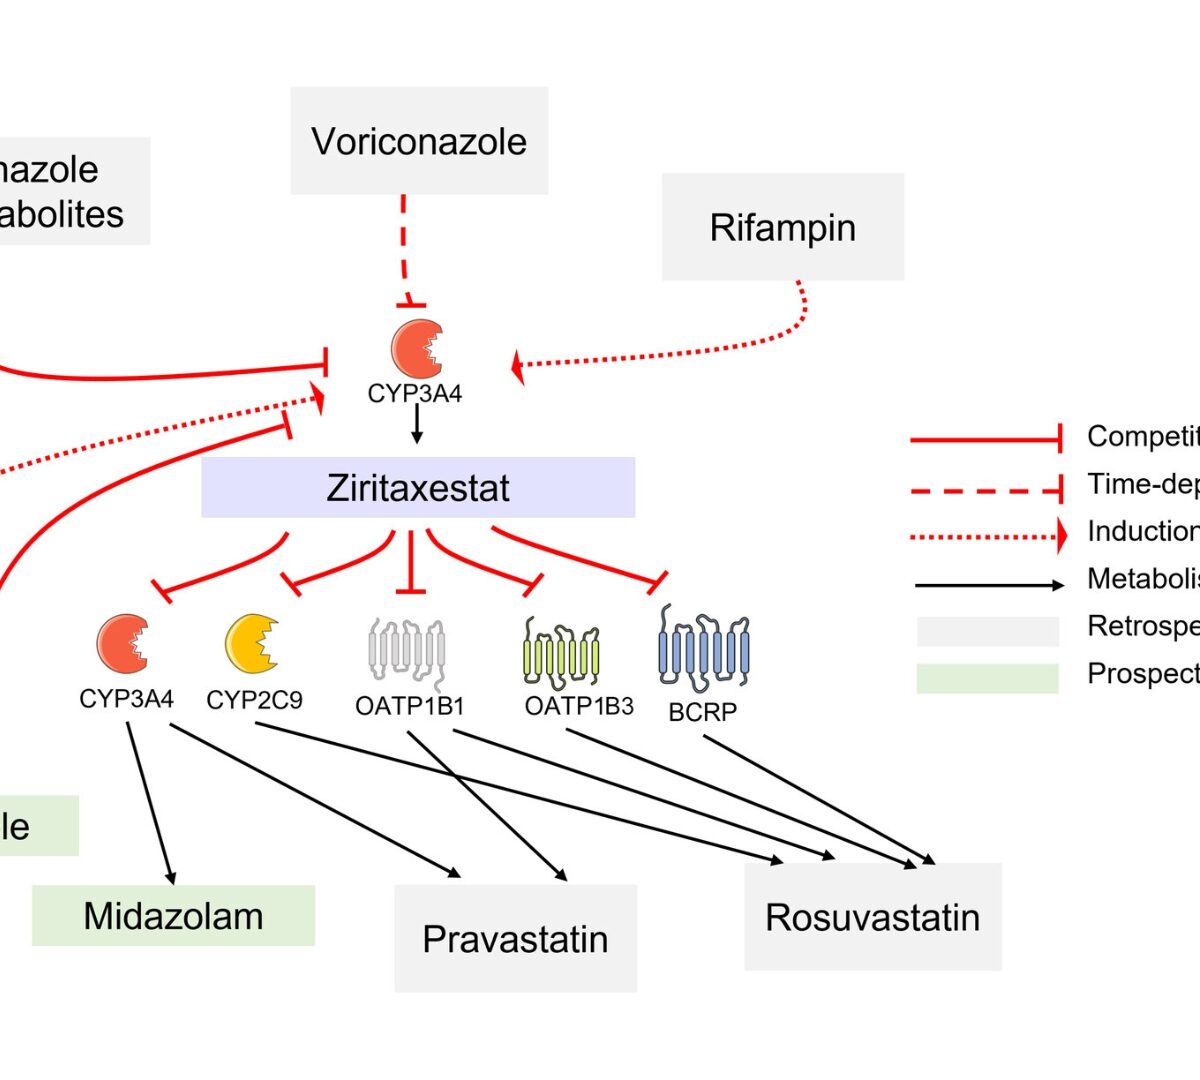 Drug–drug interaction prediction of ziritaxestat using a physiologically based enzyme and transporter pharmacokinetic network interaction model